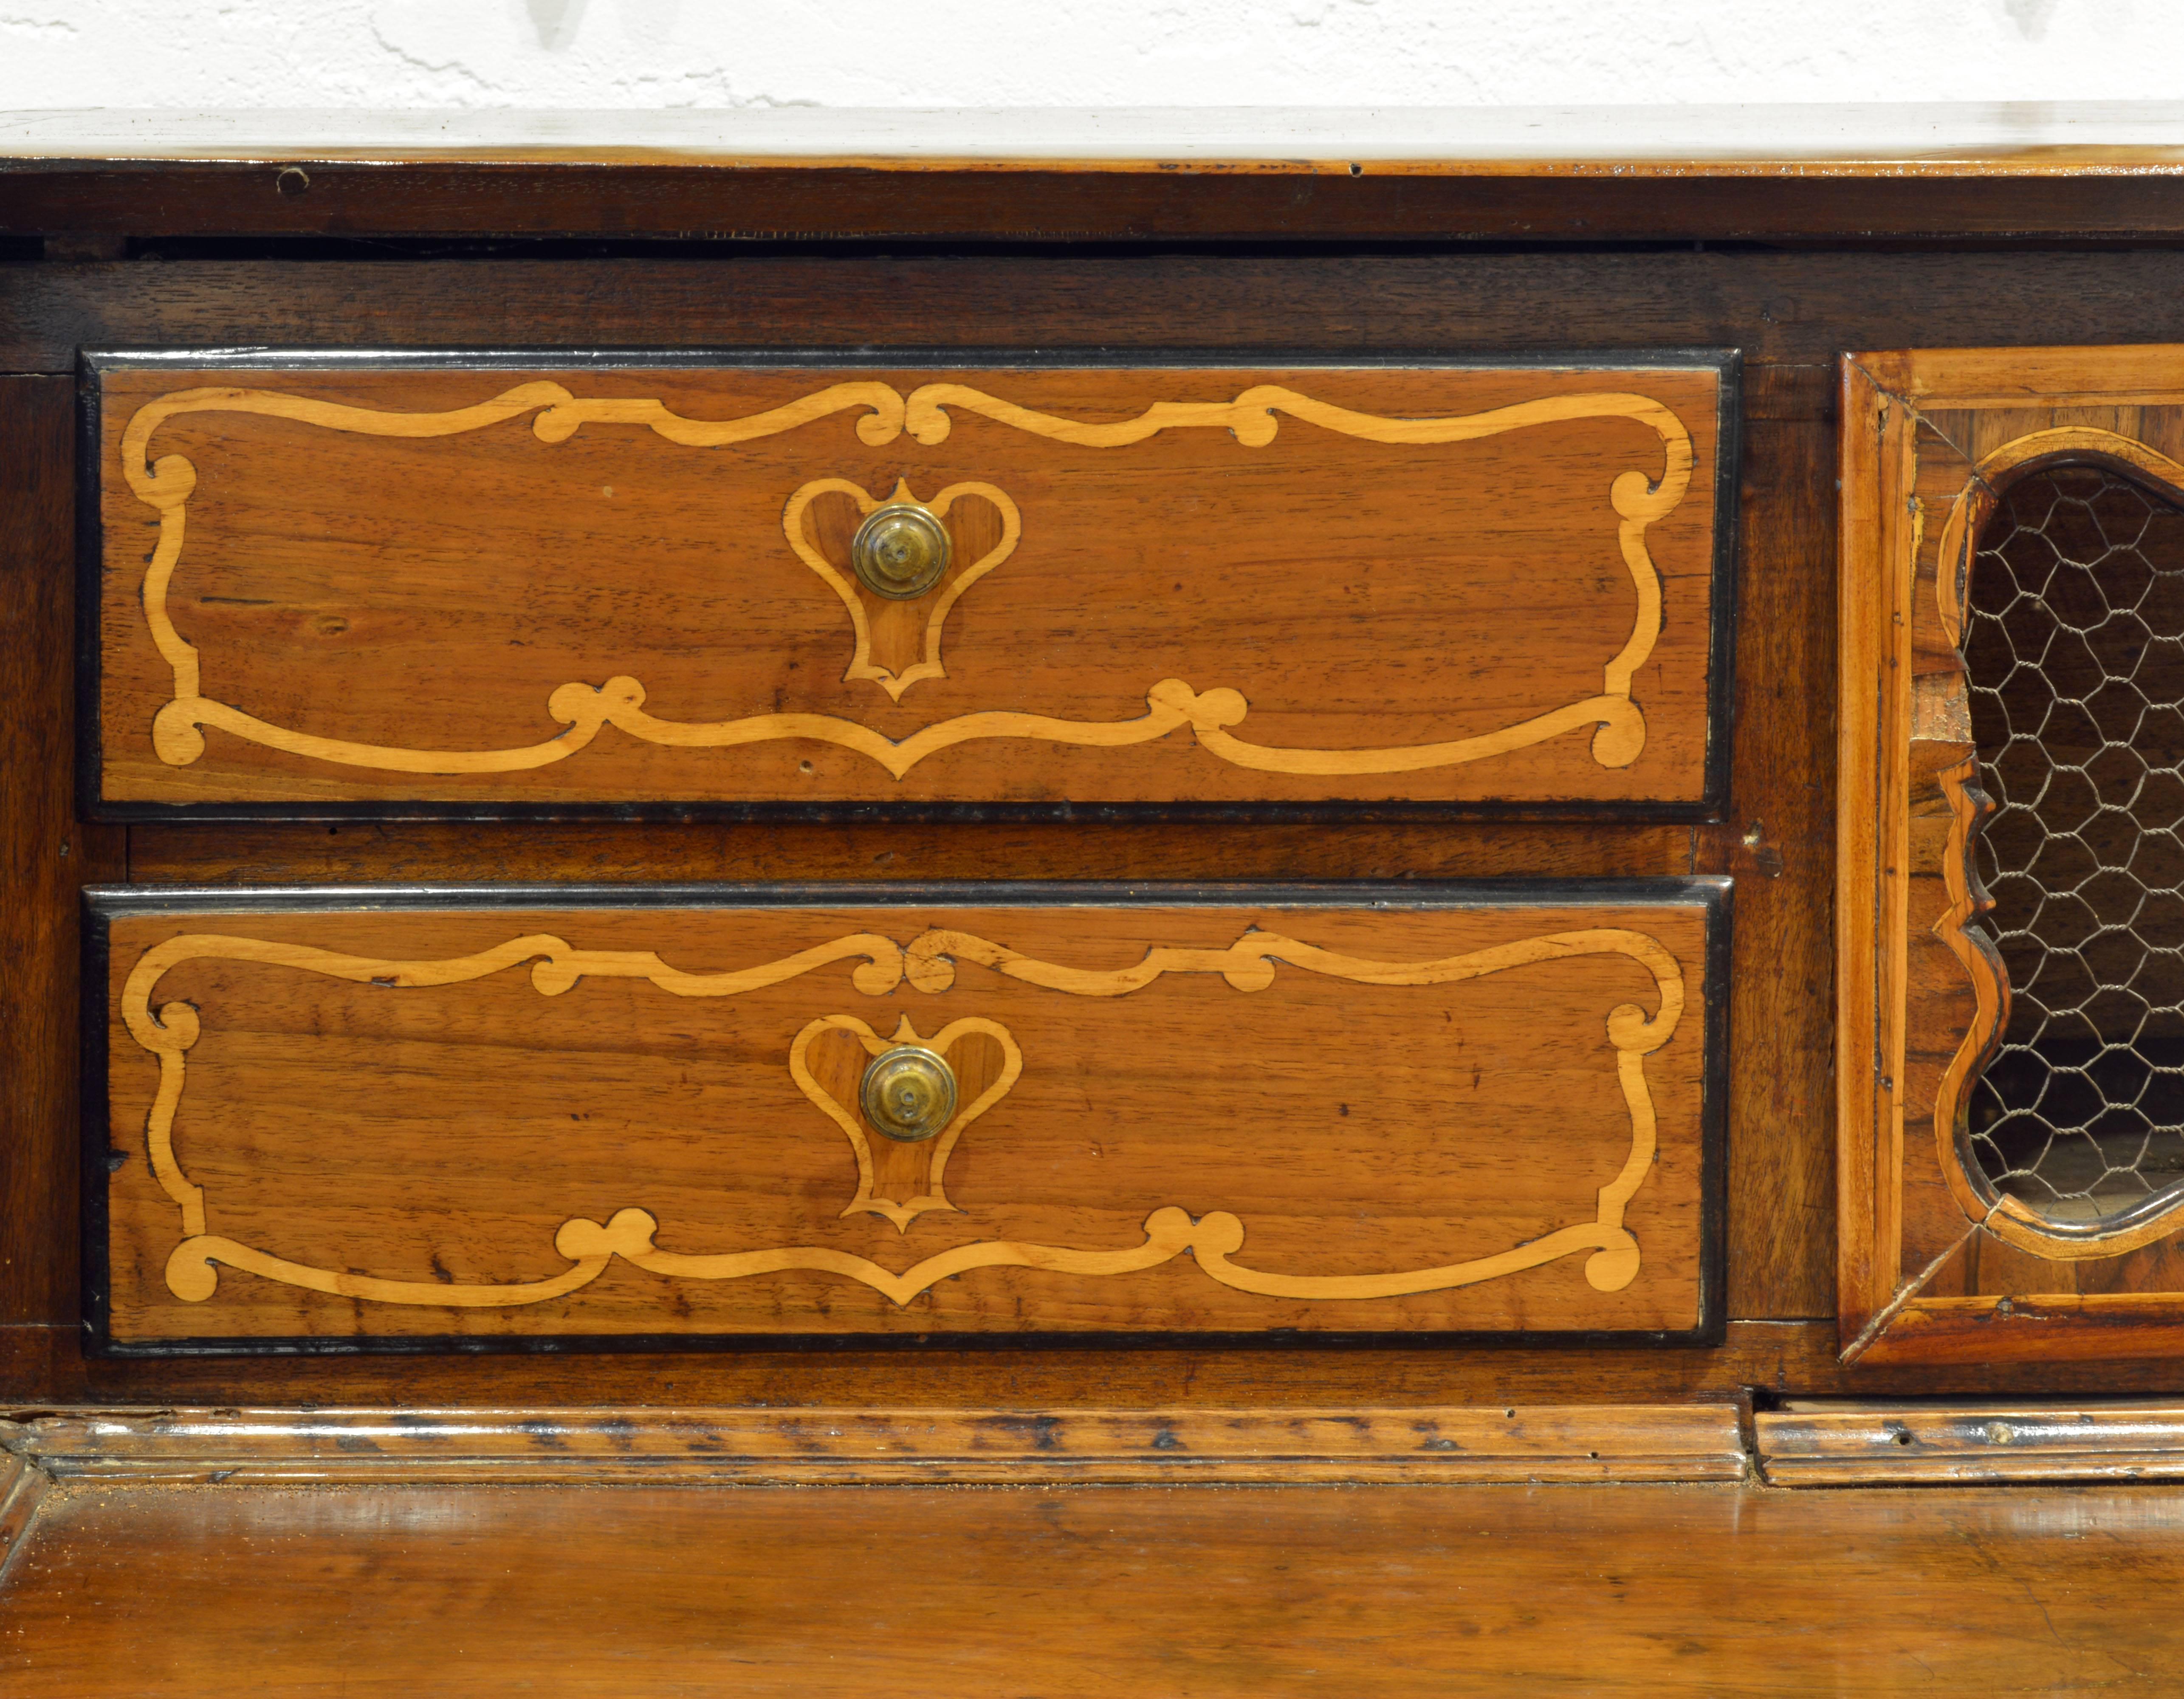 Charming 18th Century Italian Rococo Walnut and Fruitwood Inlaid Fall Front Desk (Messing)